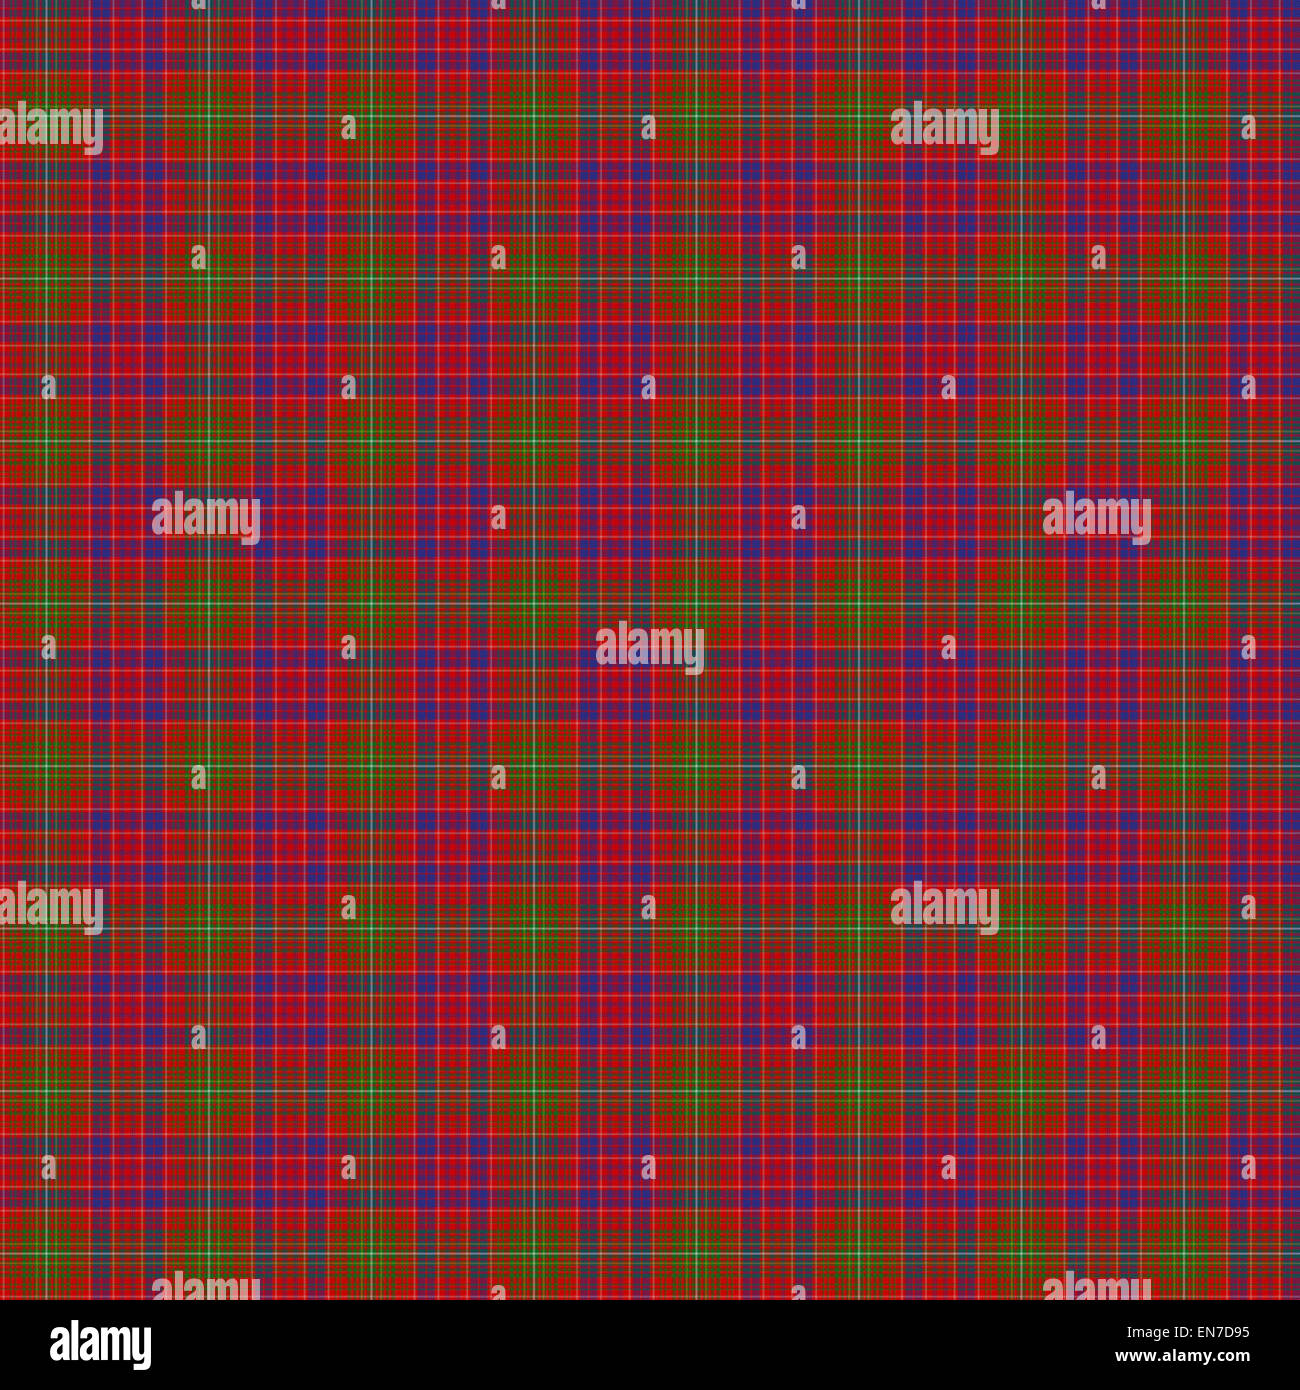 A seamless patterned tile of the clan Lumsden tartan. Stock Photo